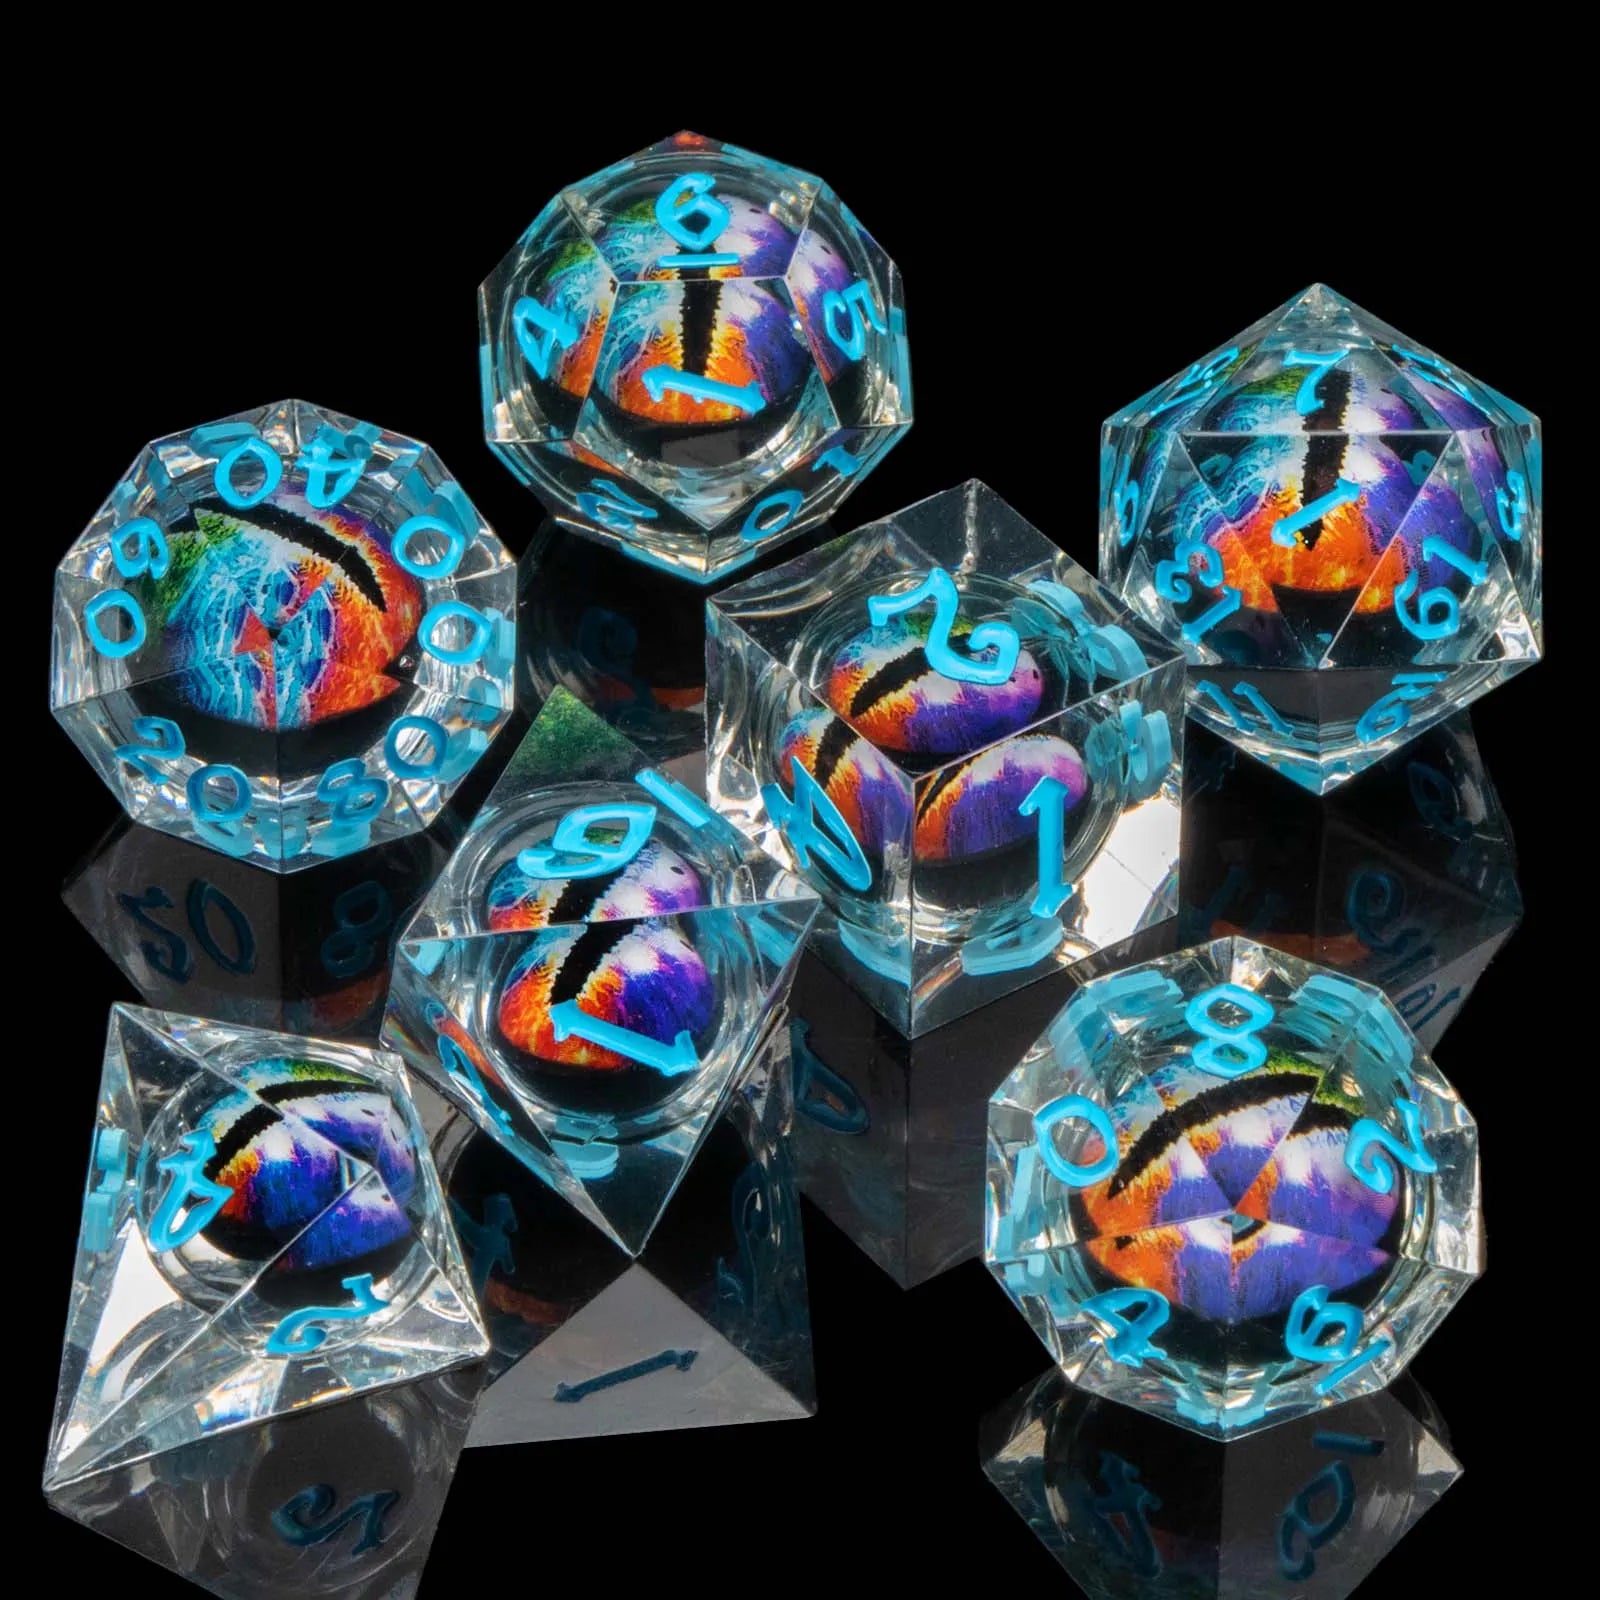 D and D Flowing Sand Sharp Edge Dragon Eye Dnd Resin RPG Polyhedral D&D Dice Set For Dungeon and Dragon Pathfinder Role Playing AZ12